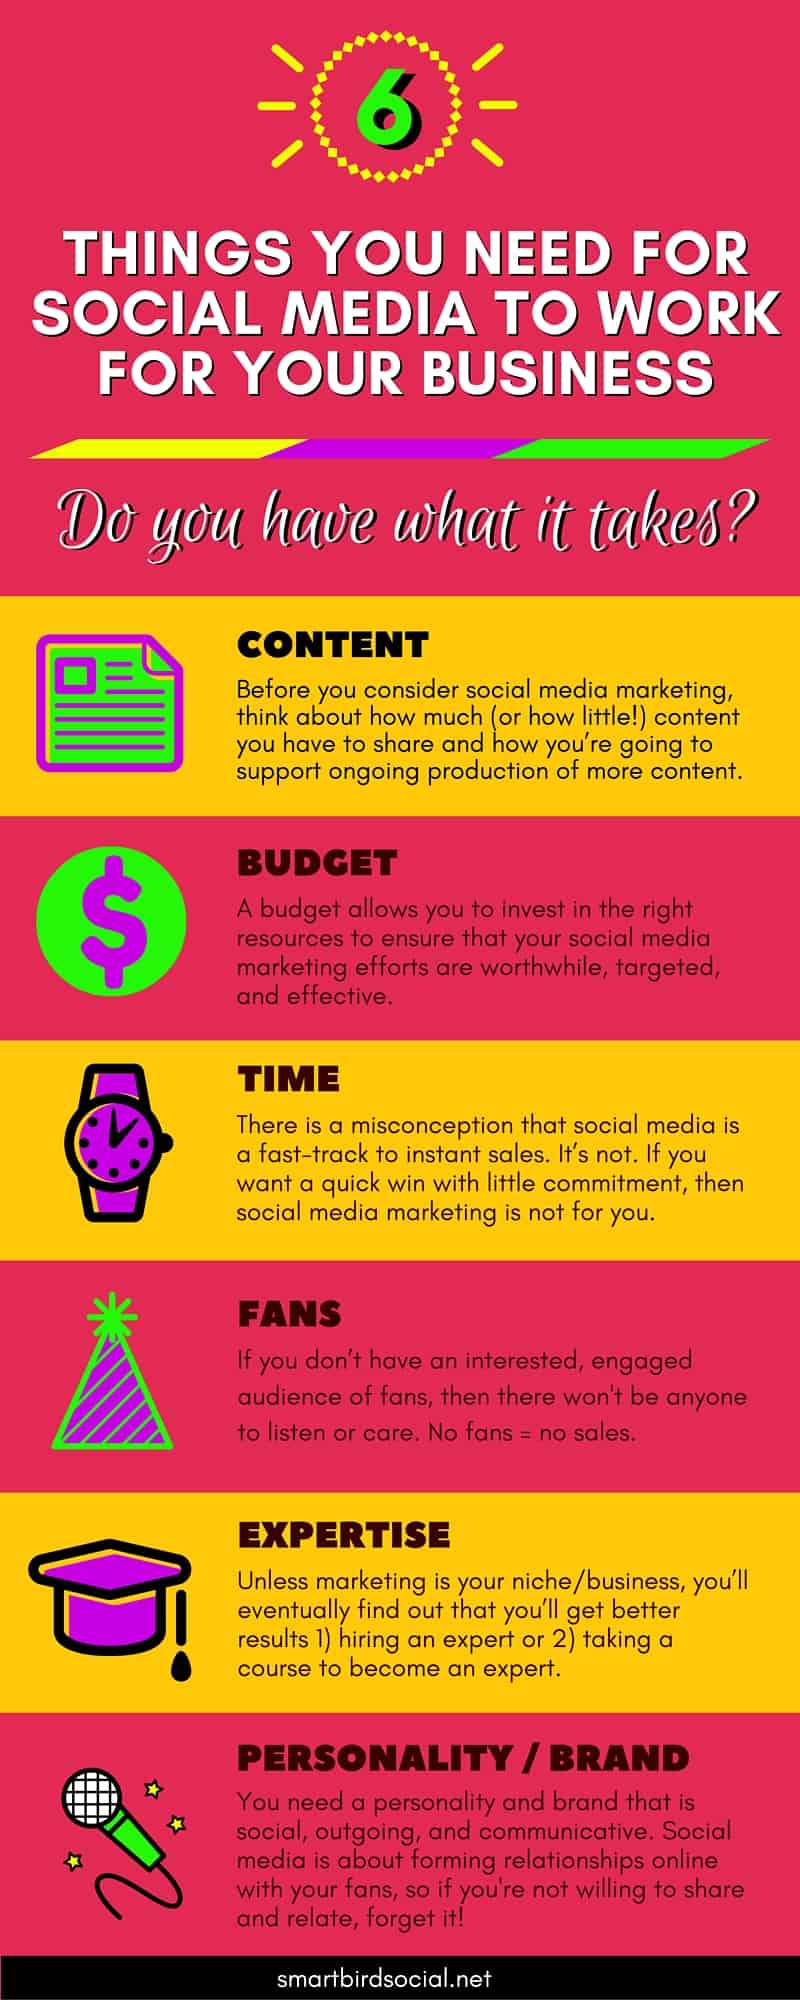 6 Things You Need For Social Media to Work for Your Business infographic